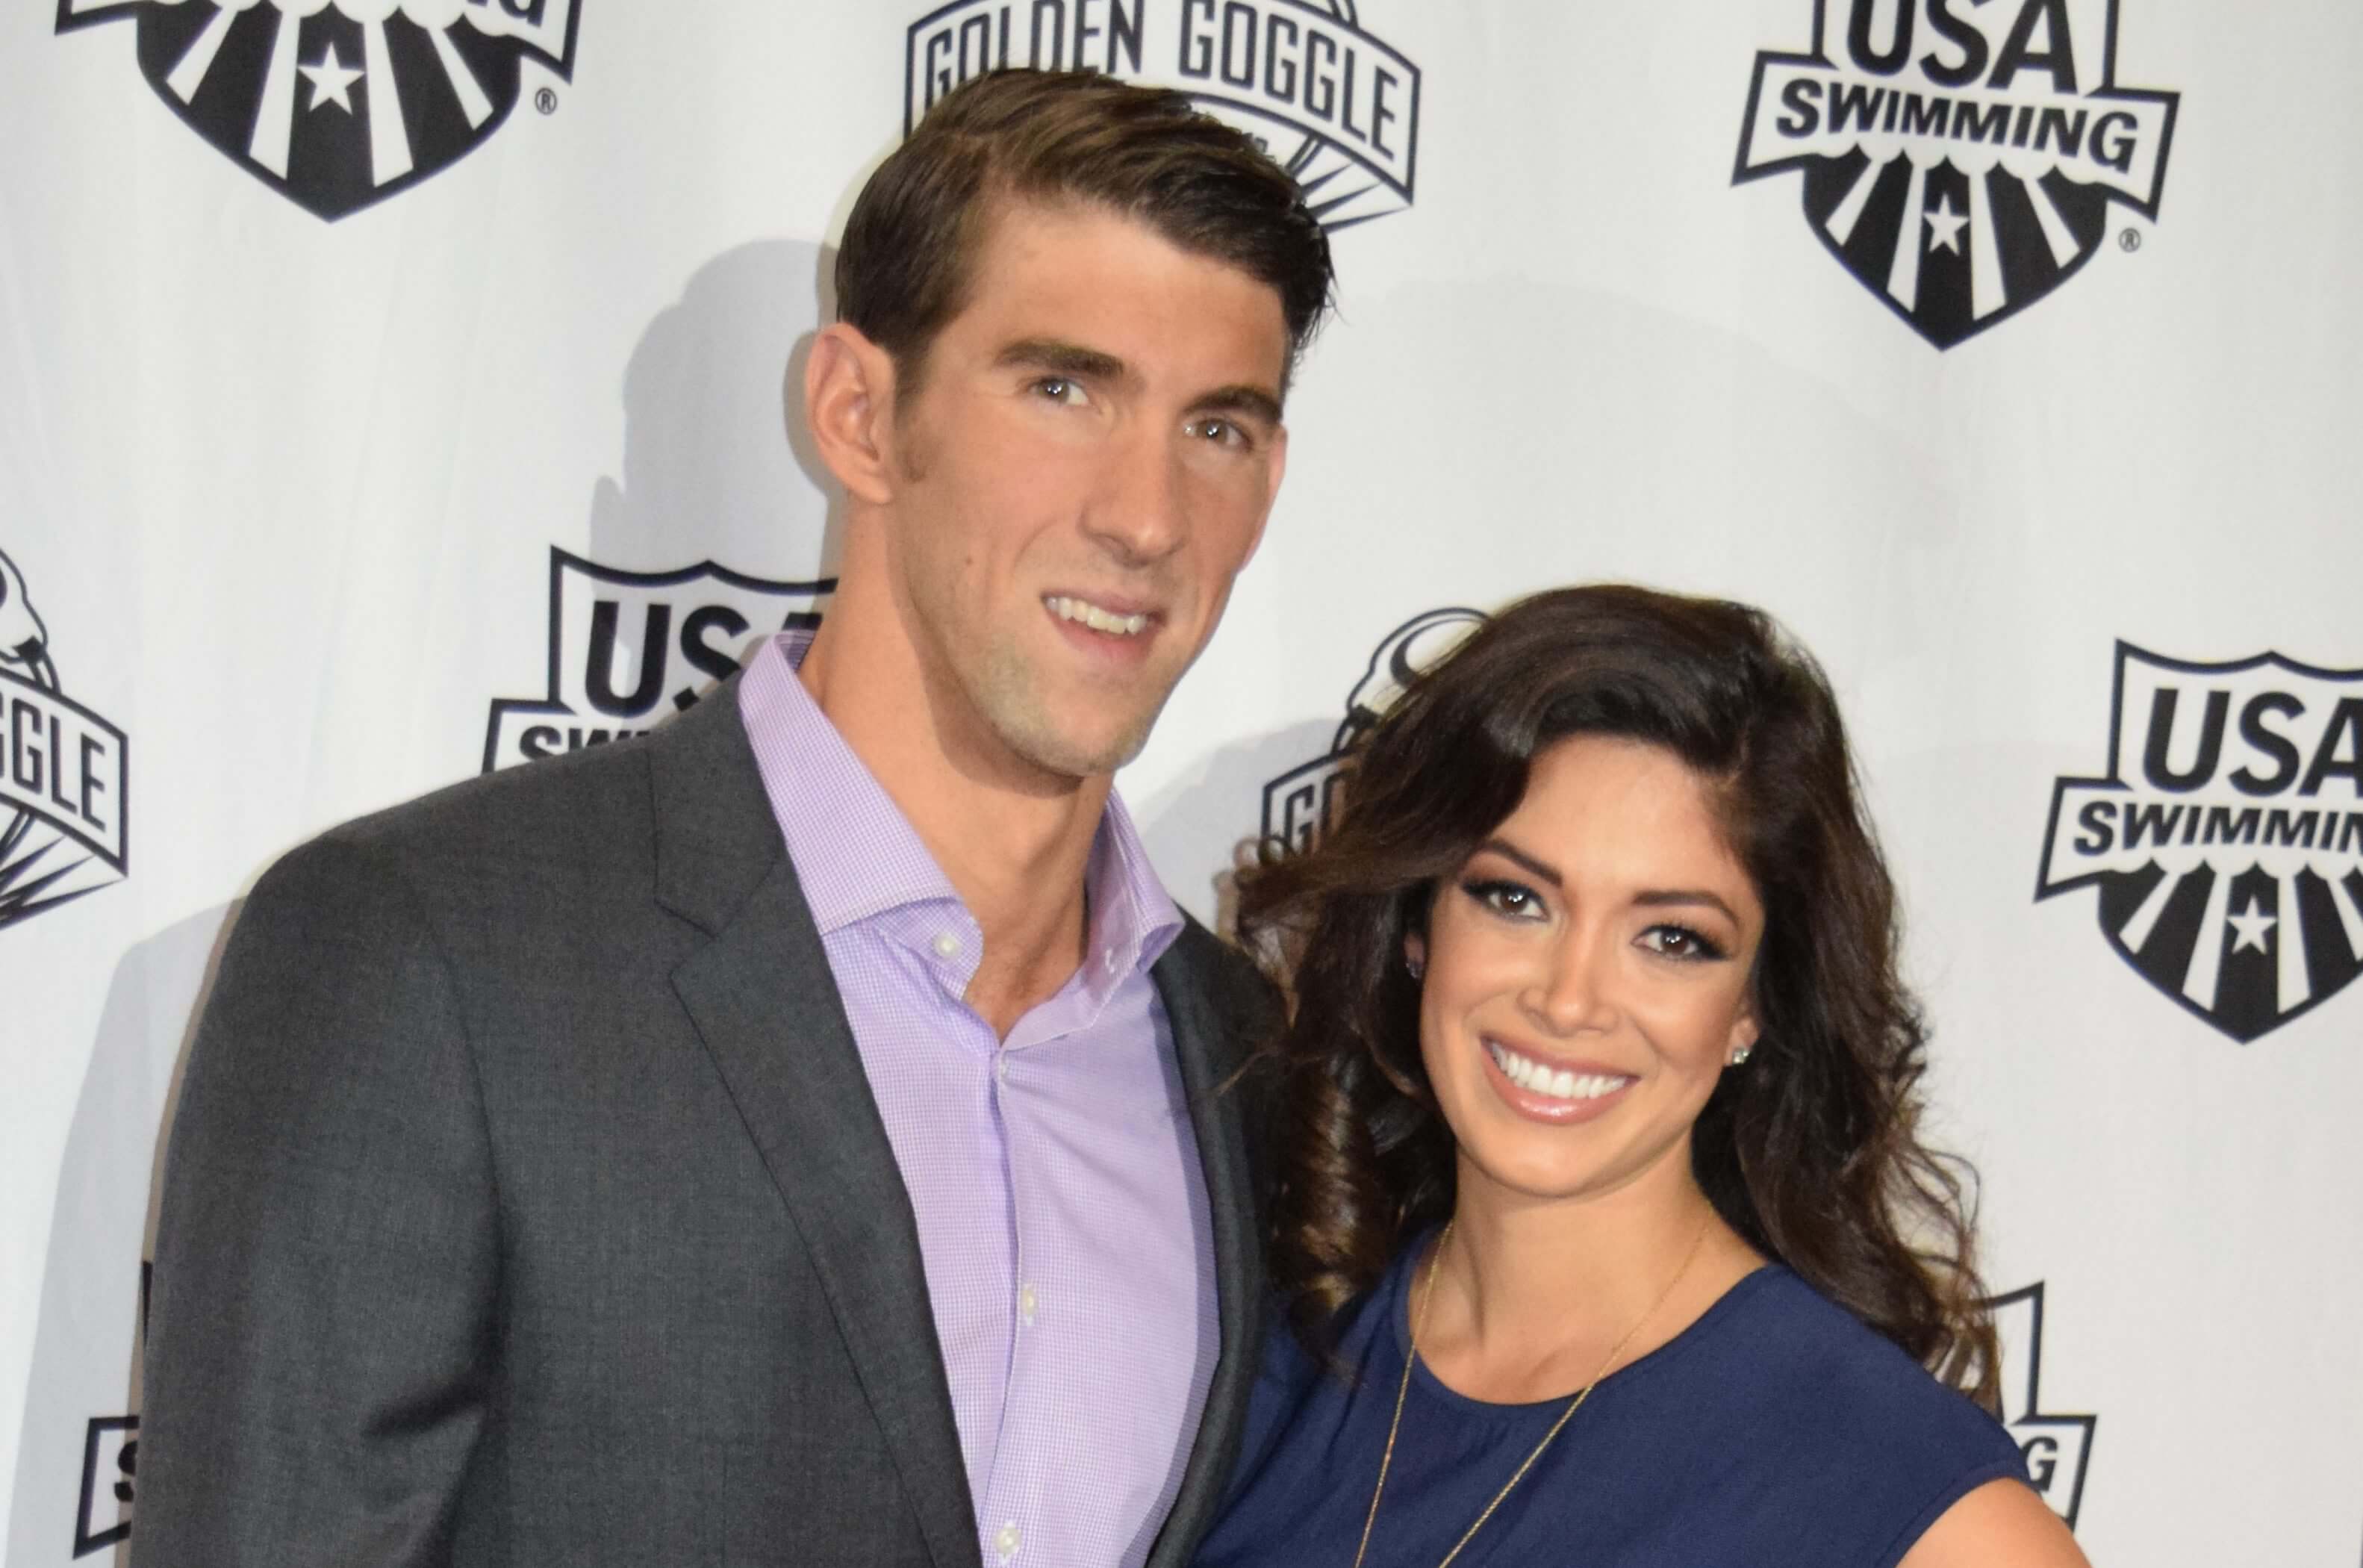 Boomer is a big brother: Phelps family welcomes second baby